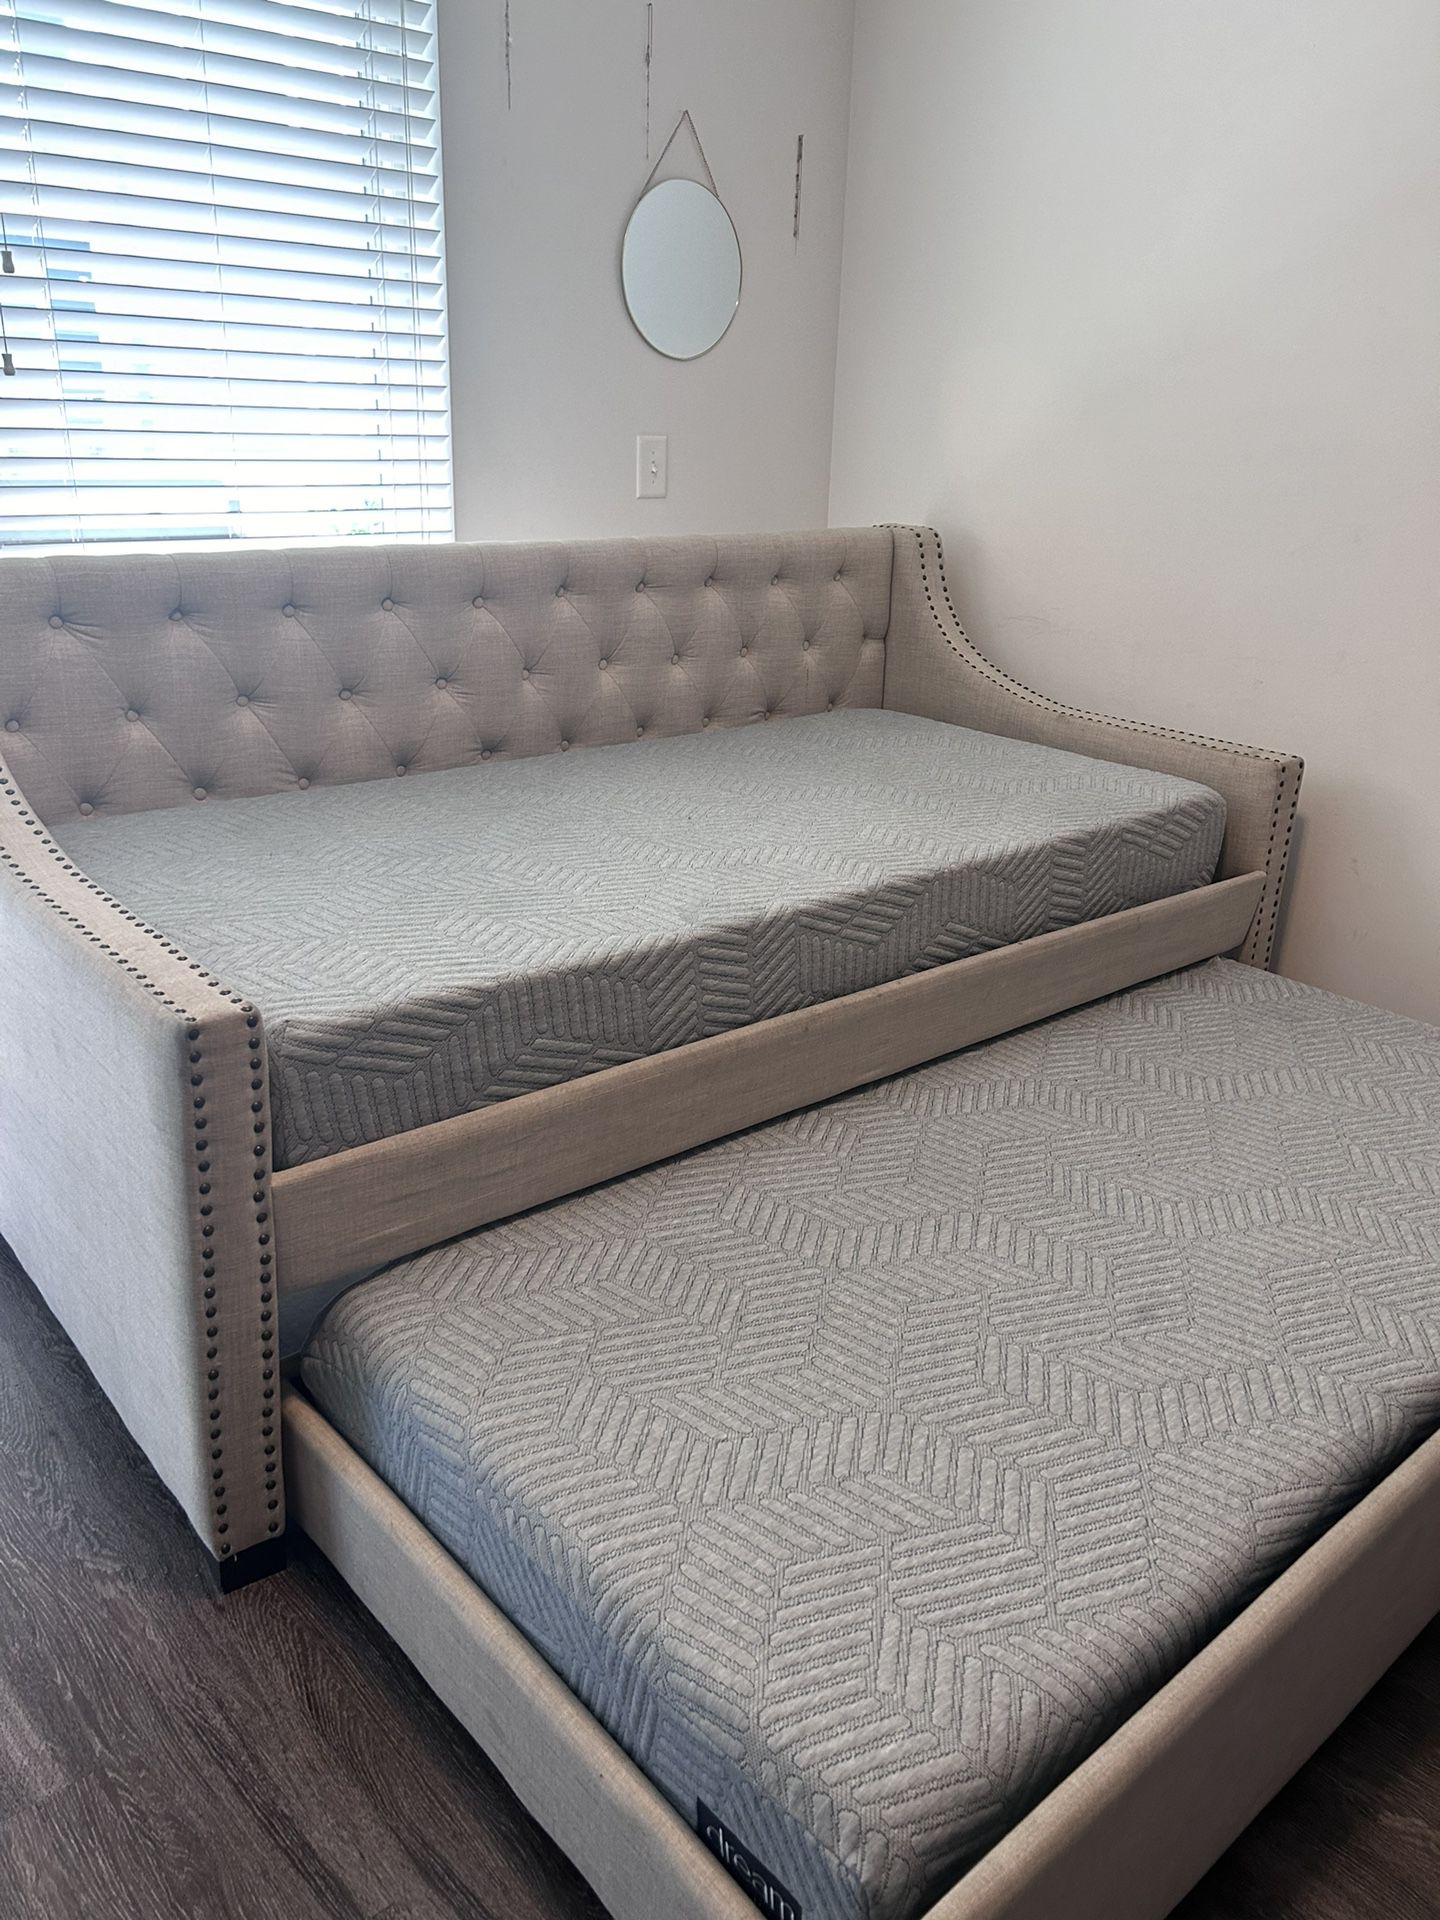 Daybed / Twin Mattress & Cover Included <3